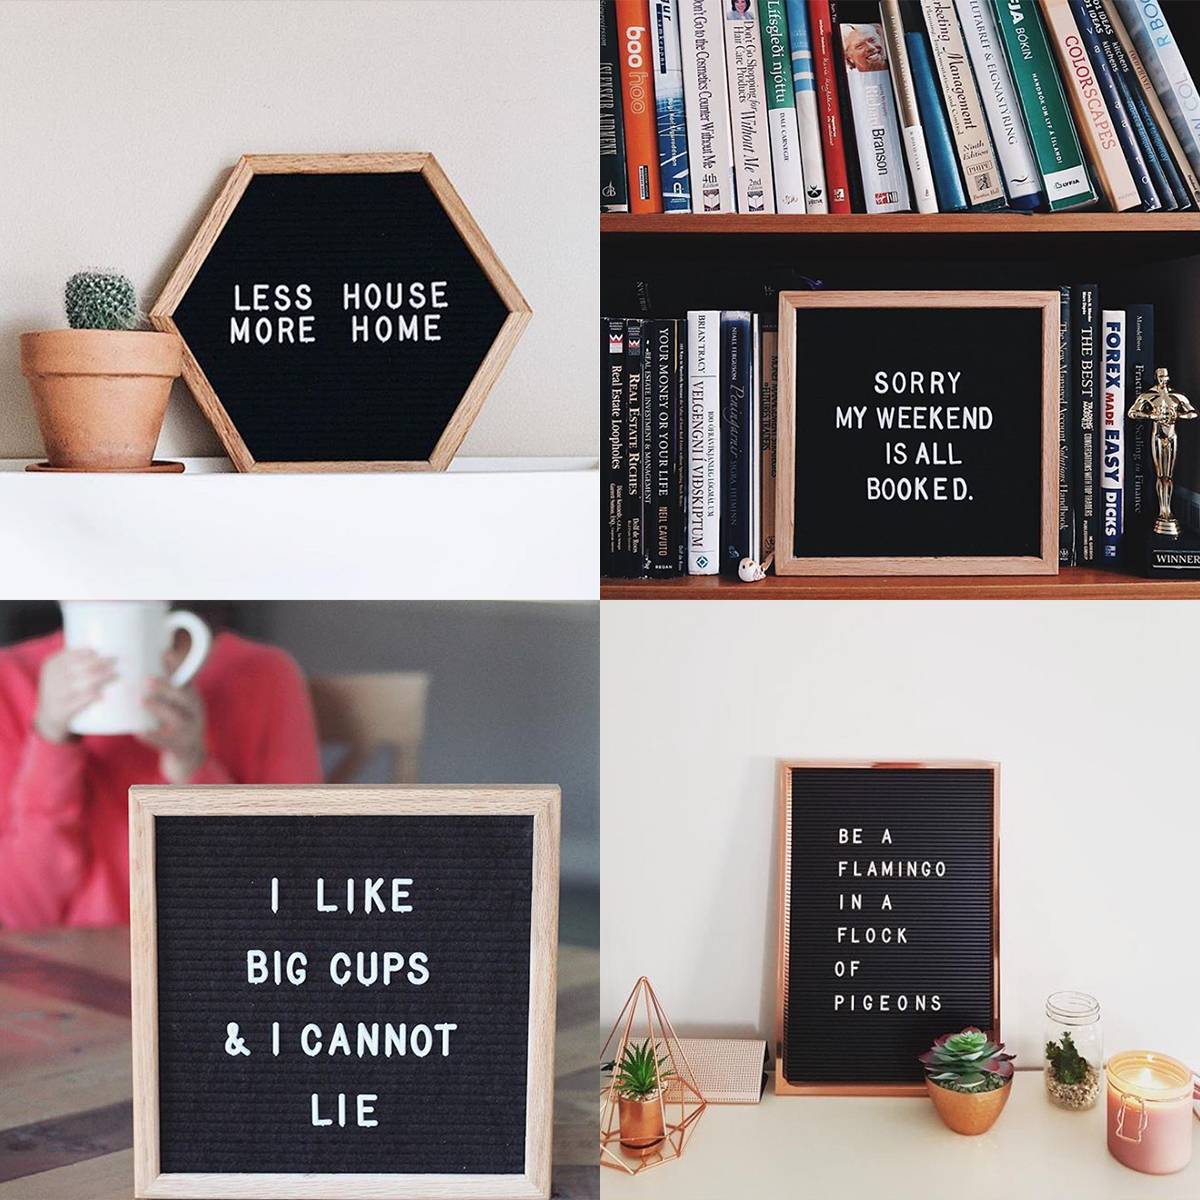 15 Instagram accounts to follow if you're in it for more than the pictures | Letter Board Club